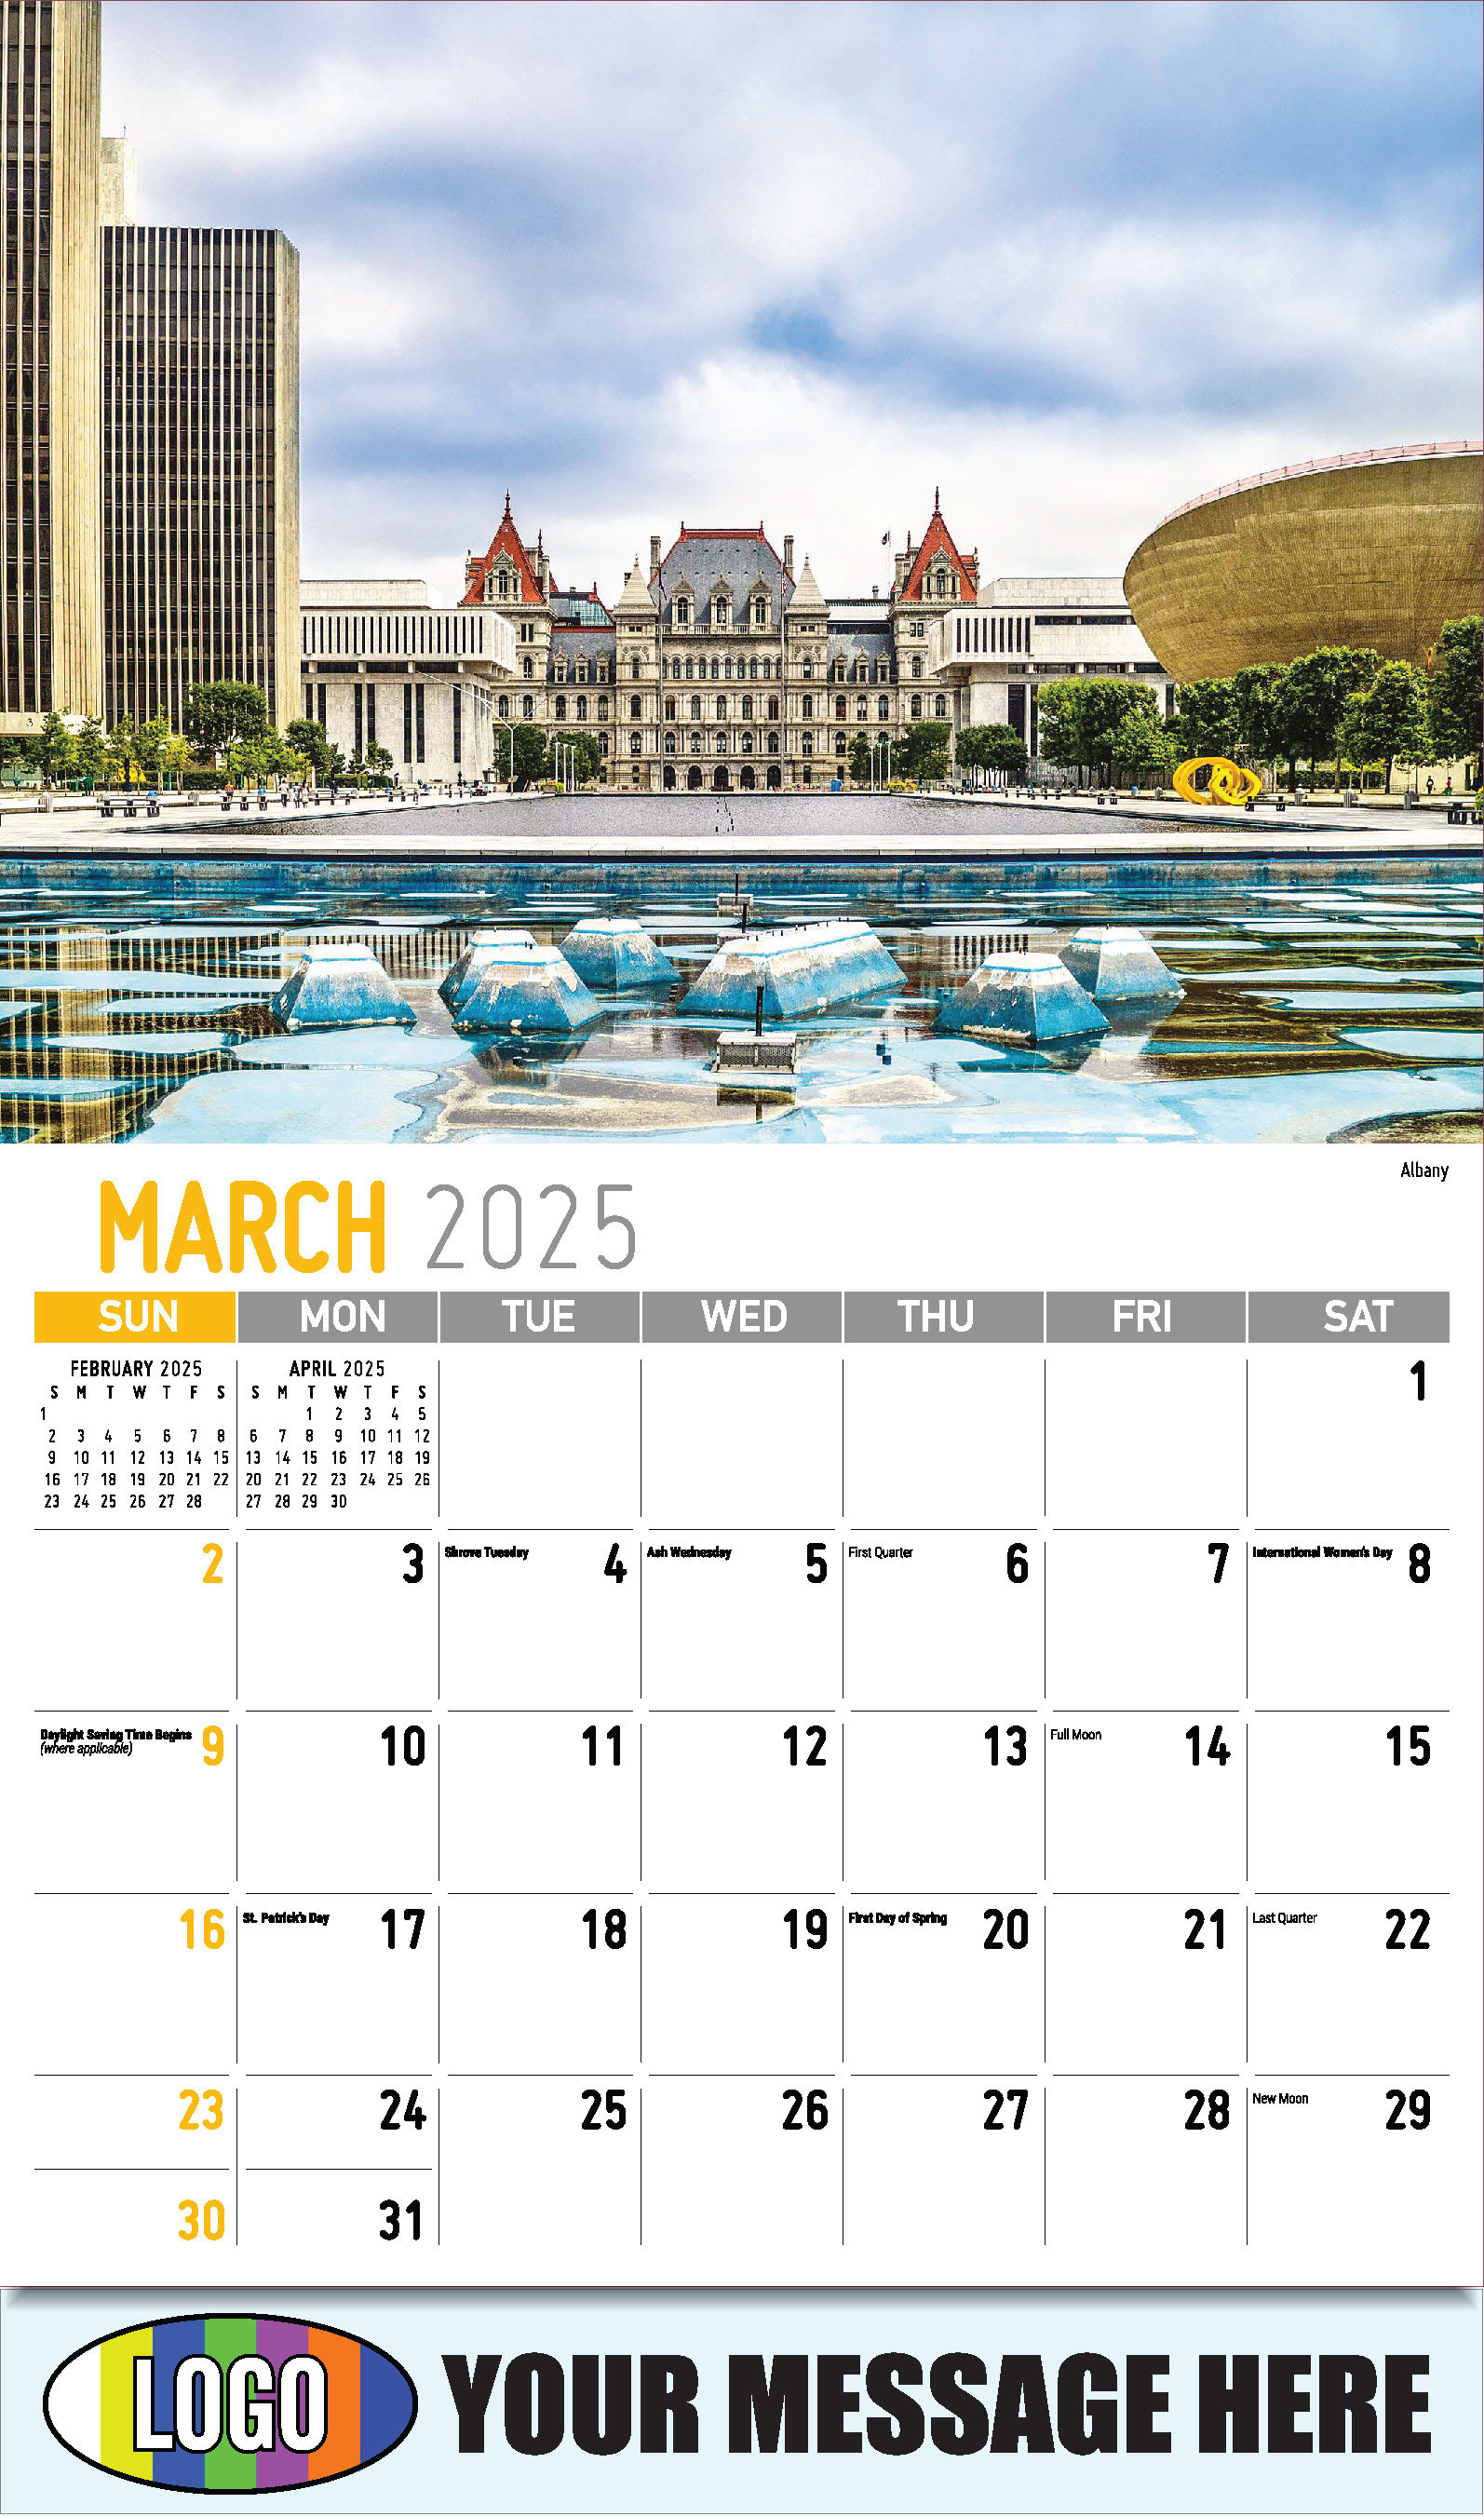 Scenes of New York 2025 Business Promotional Wall Calendar - March